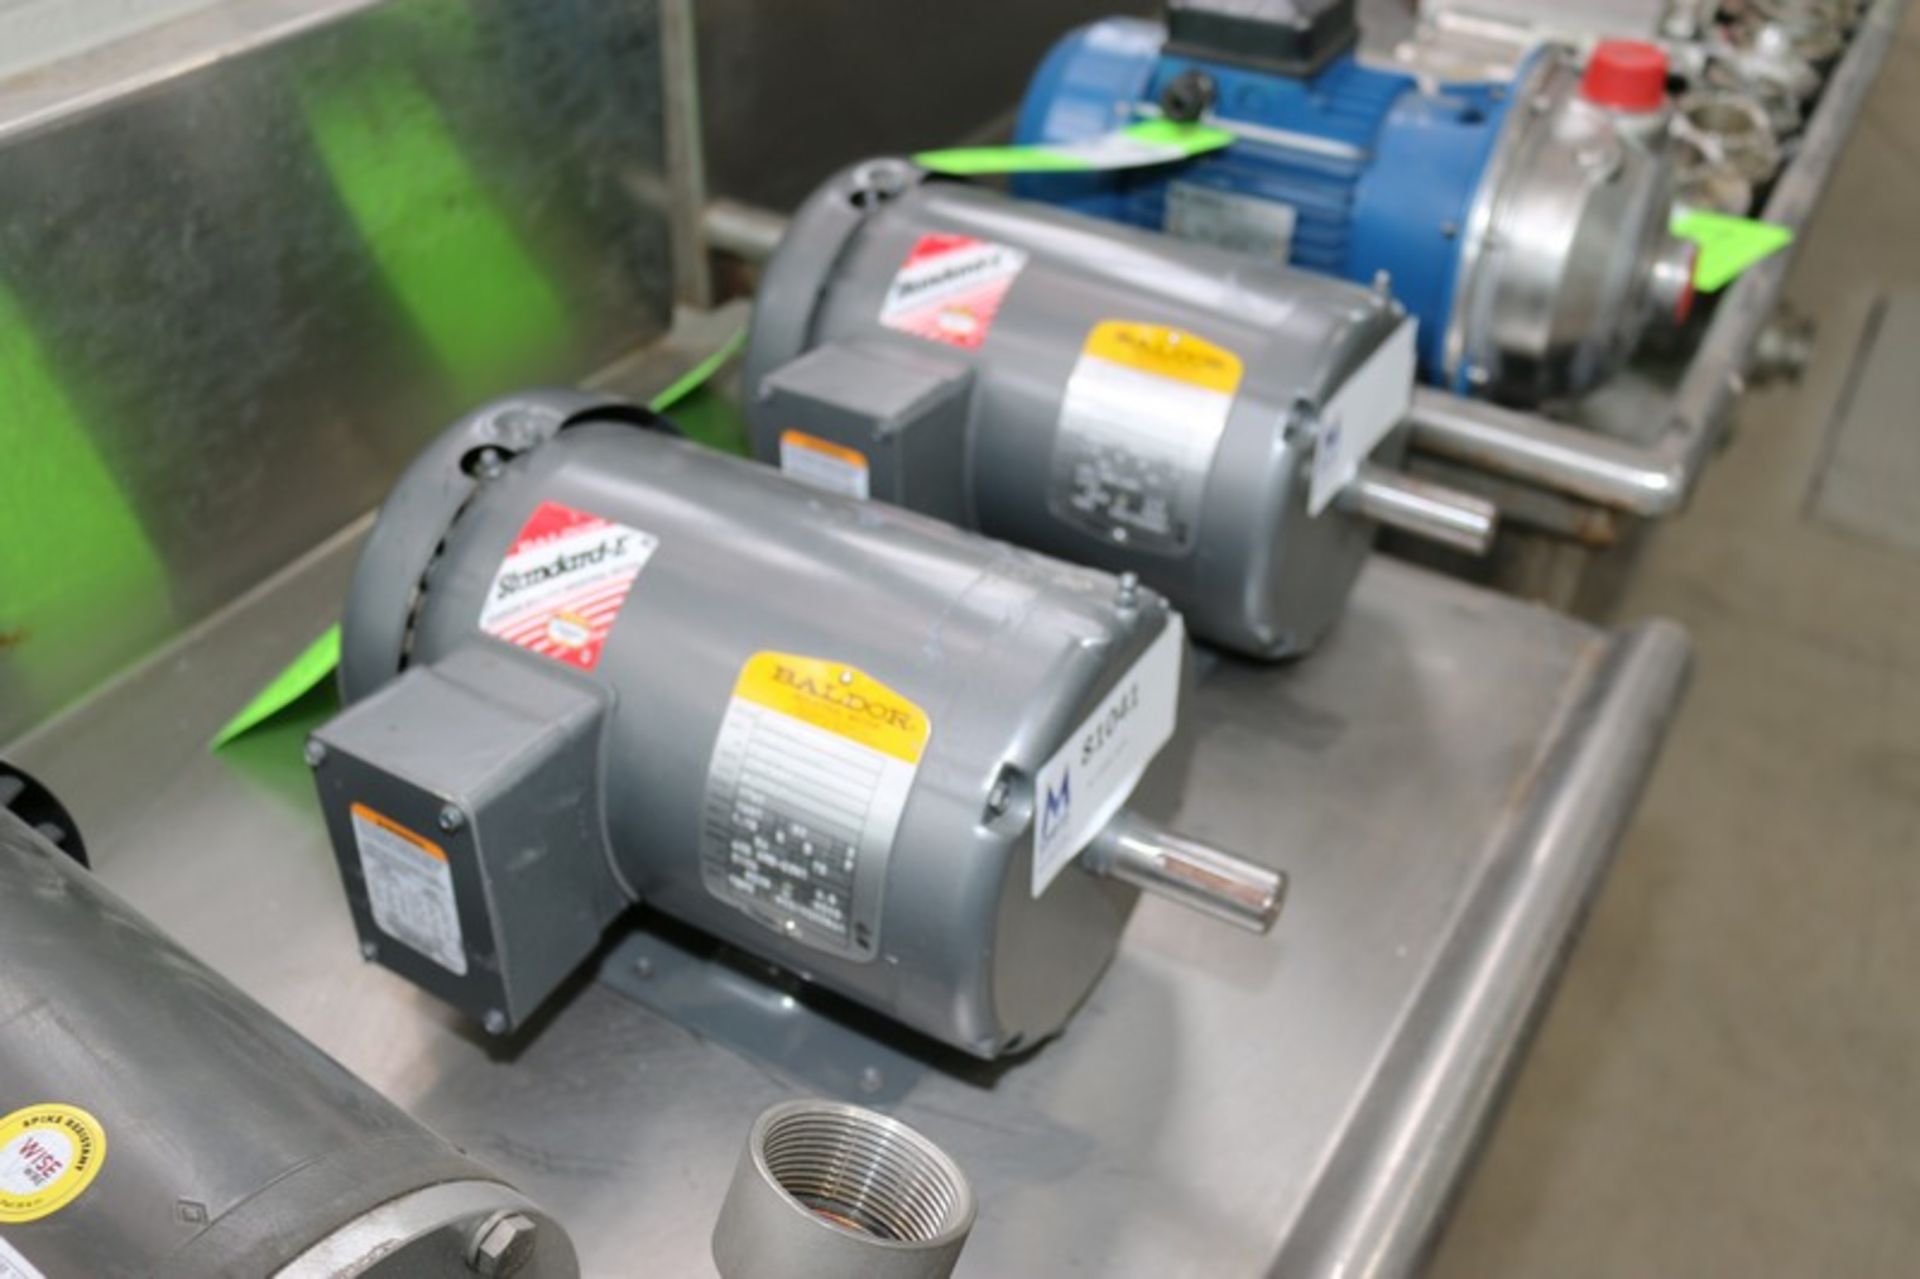 (2) NEW Baldor 1-1/2 hp Motors,230/460 Volts, 3 Phase, 1740 RPM (INV#81041)(Located @ the MDG - Image 3 of 5